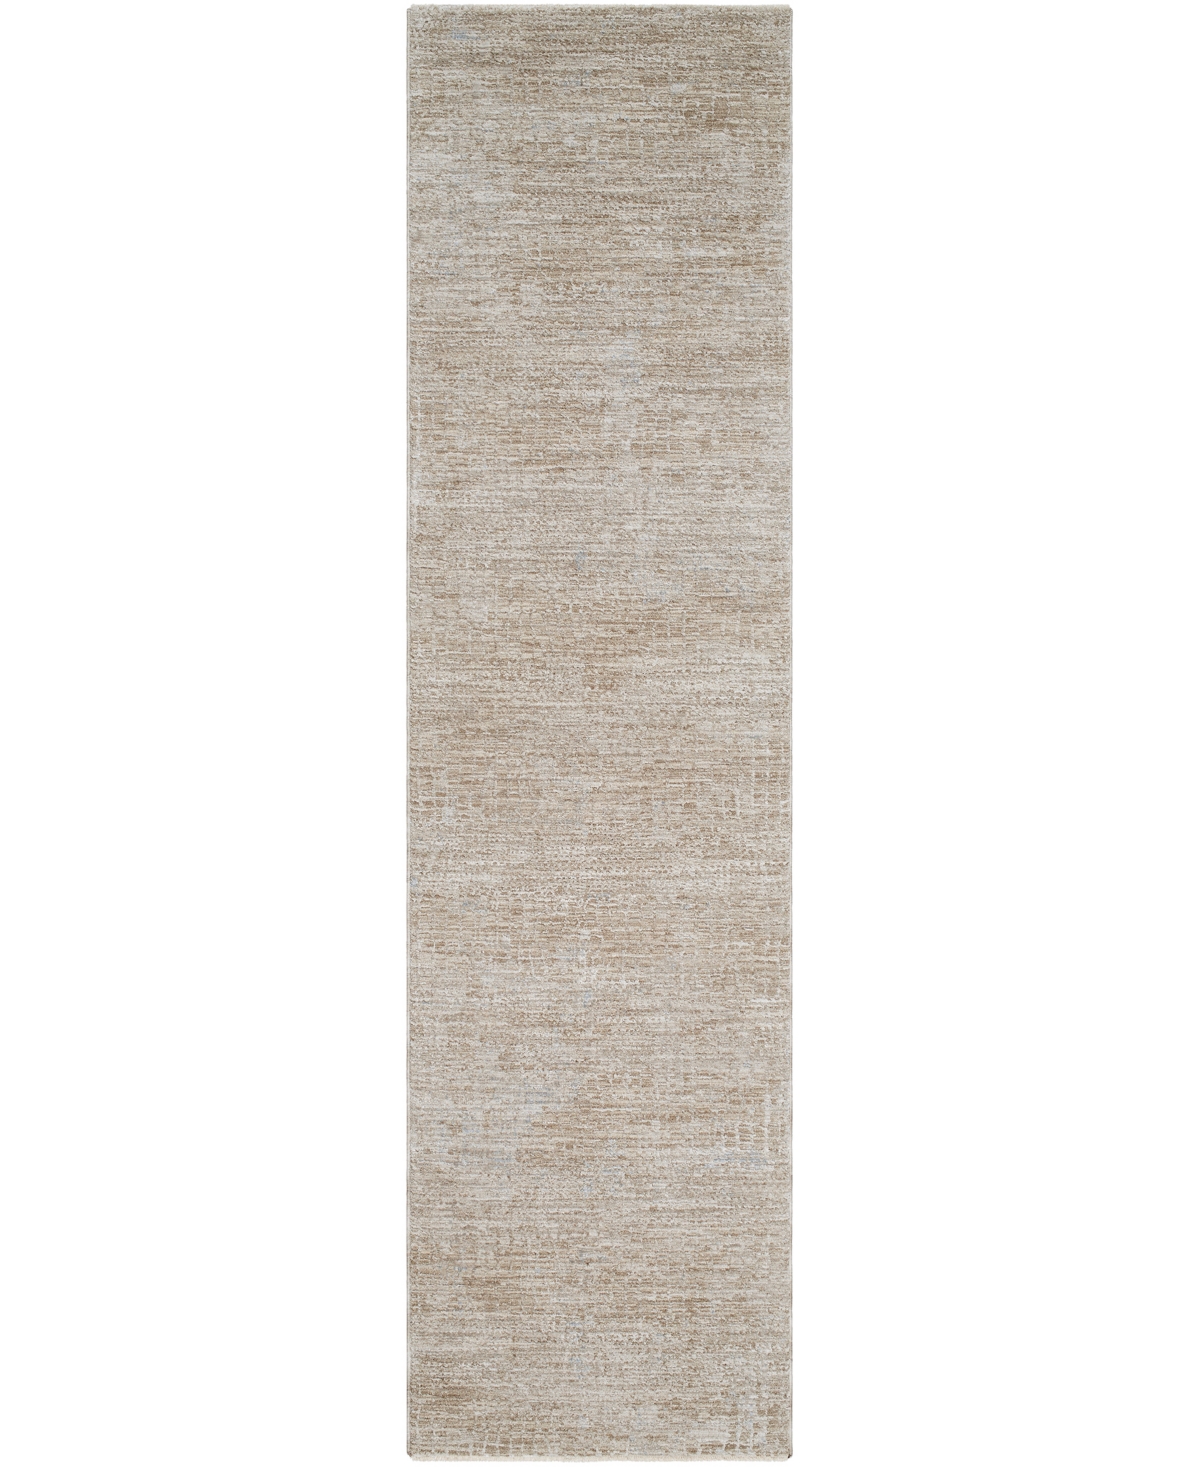 Surya Masterpiece High-low Mpc-2306 2'8" X 10' Runner Area Rug In Taupe